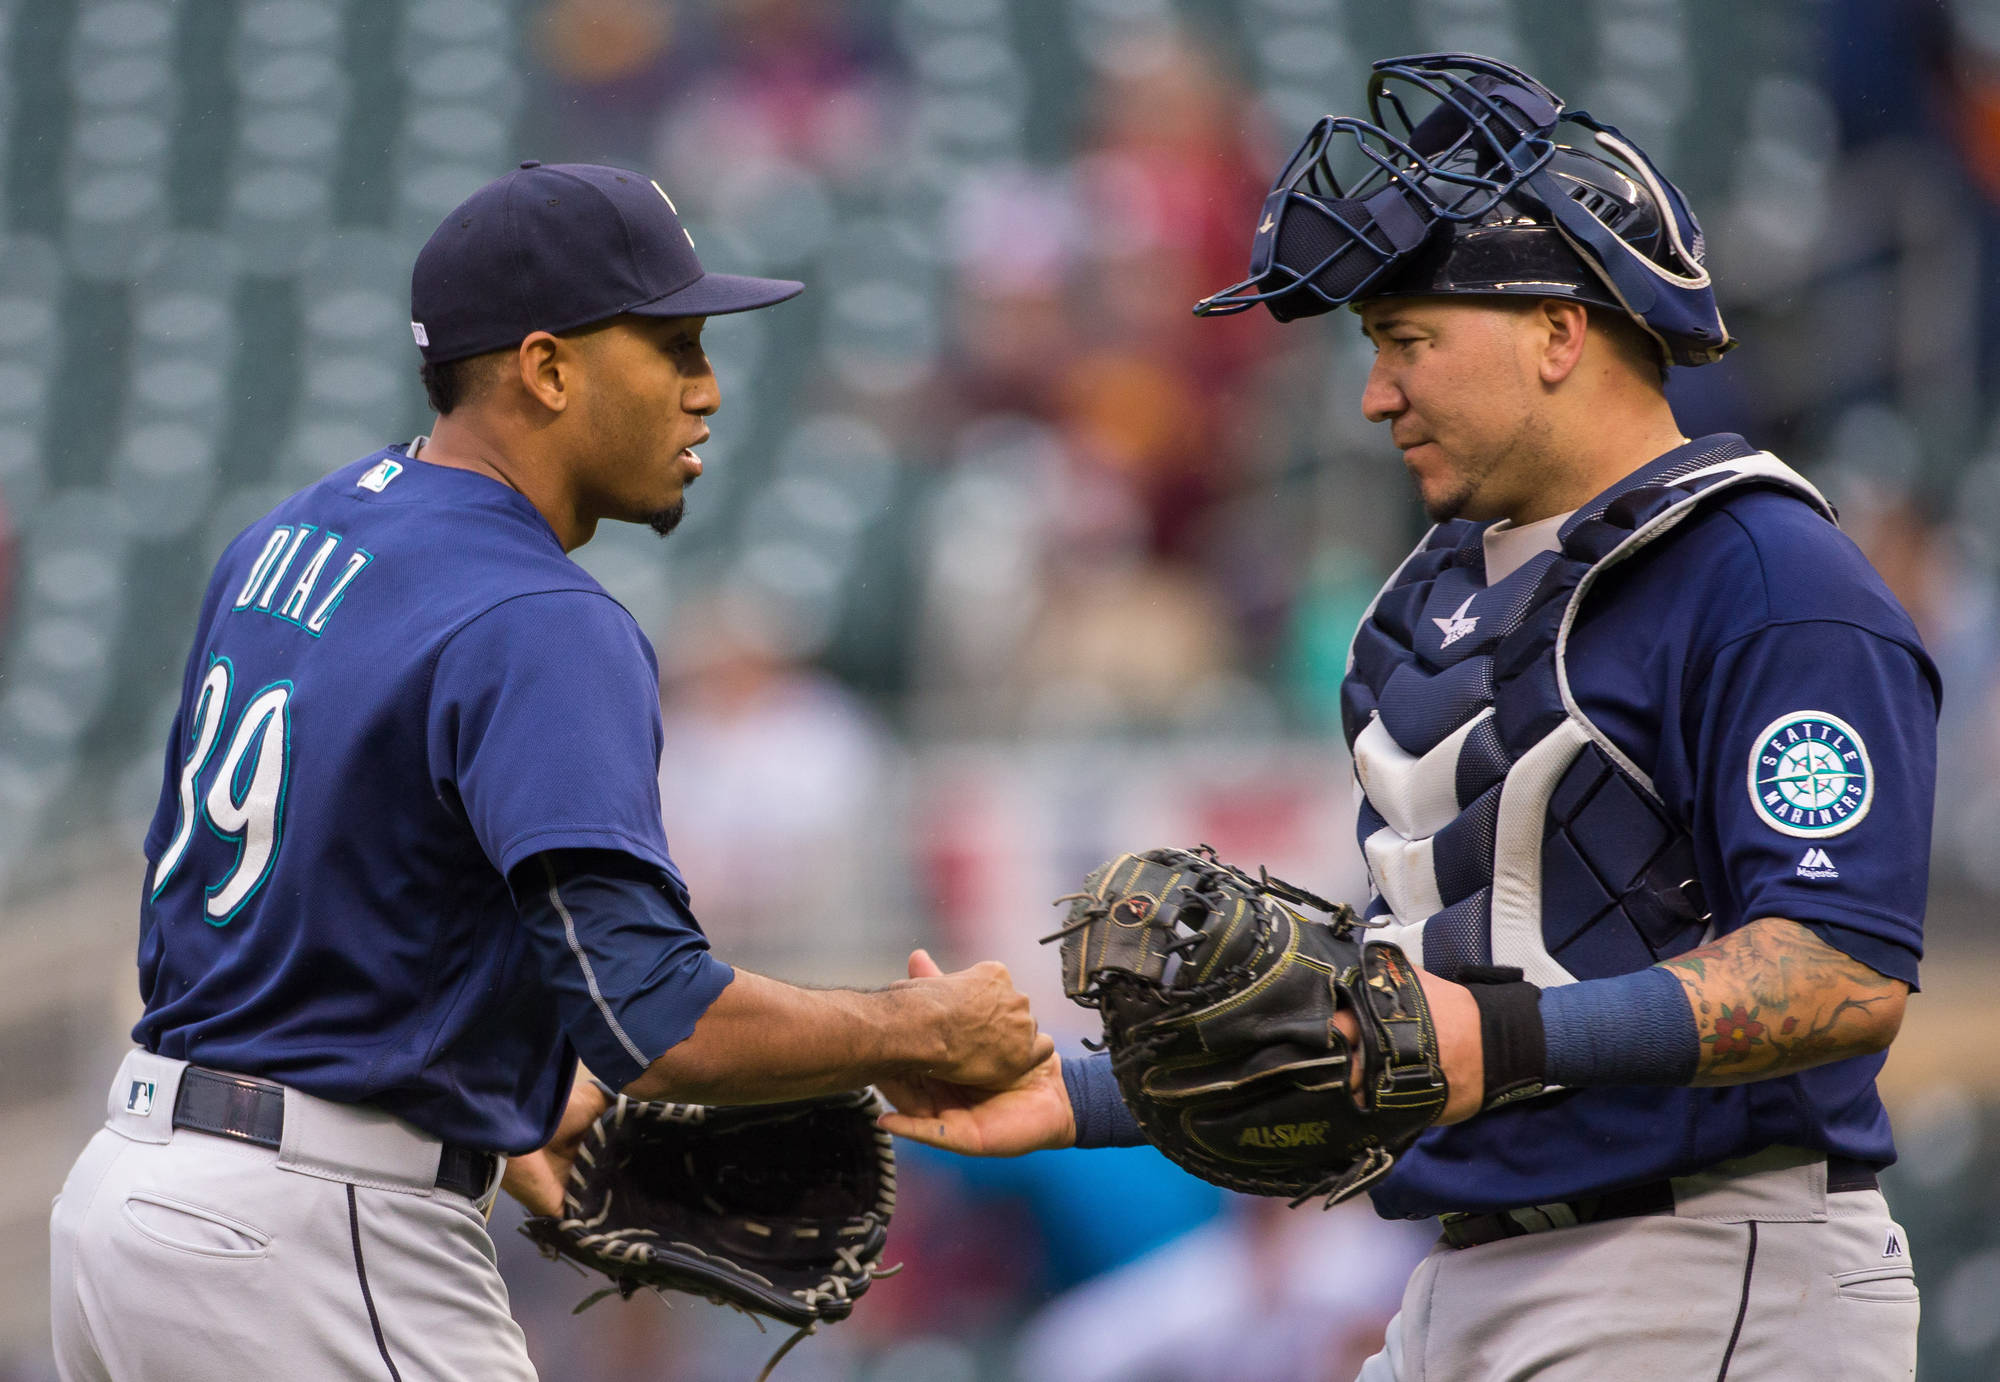 Another BIG day from Cruz, Sucre propel Mariners in series finale win over Minnesota